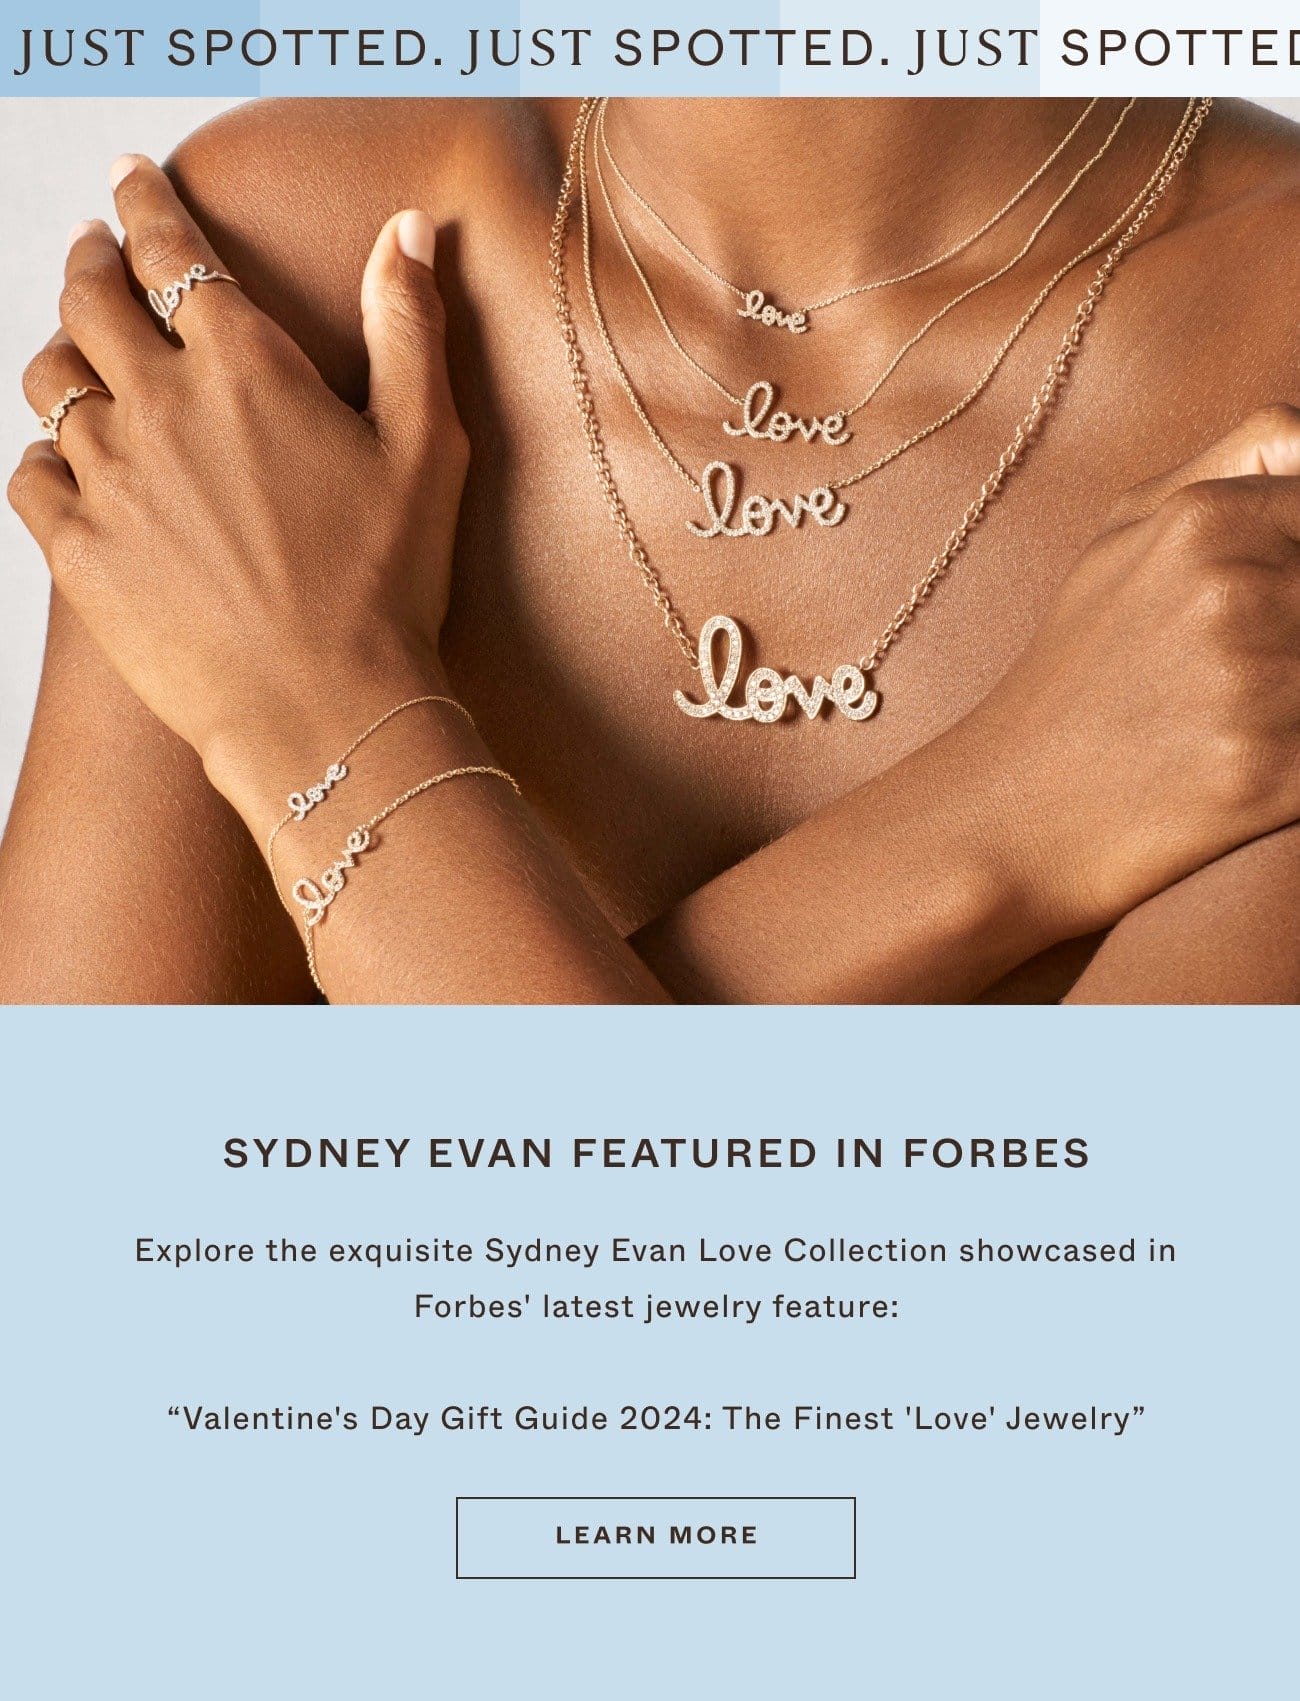 Sydney Evan Love Collection Featured in Forbes